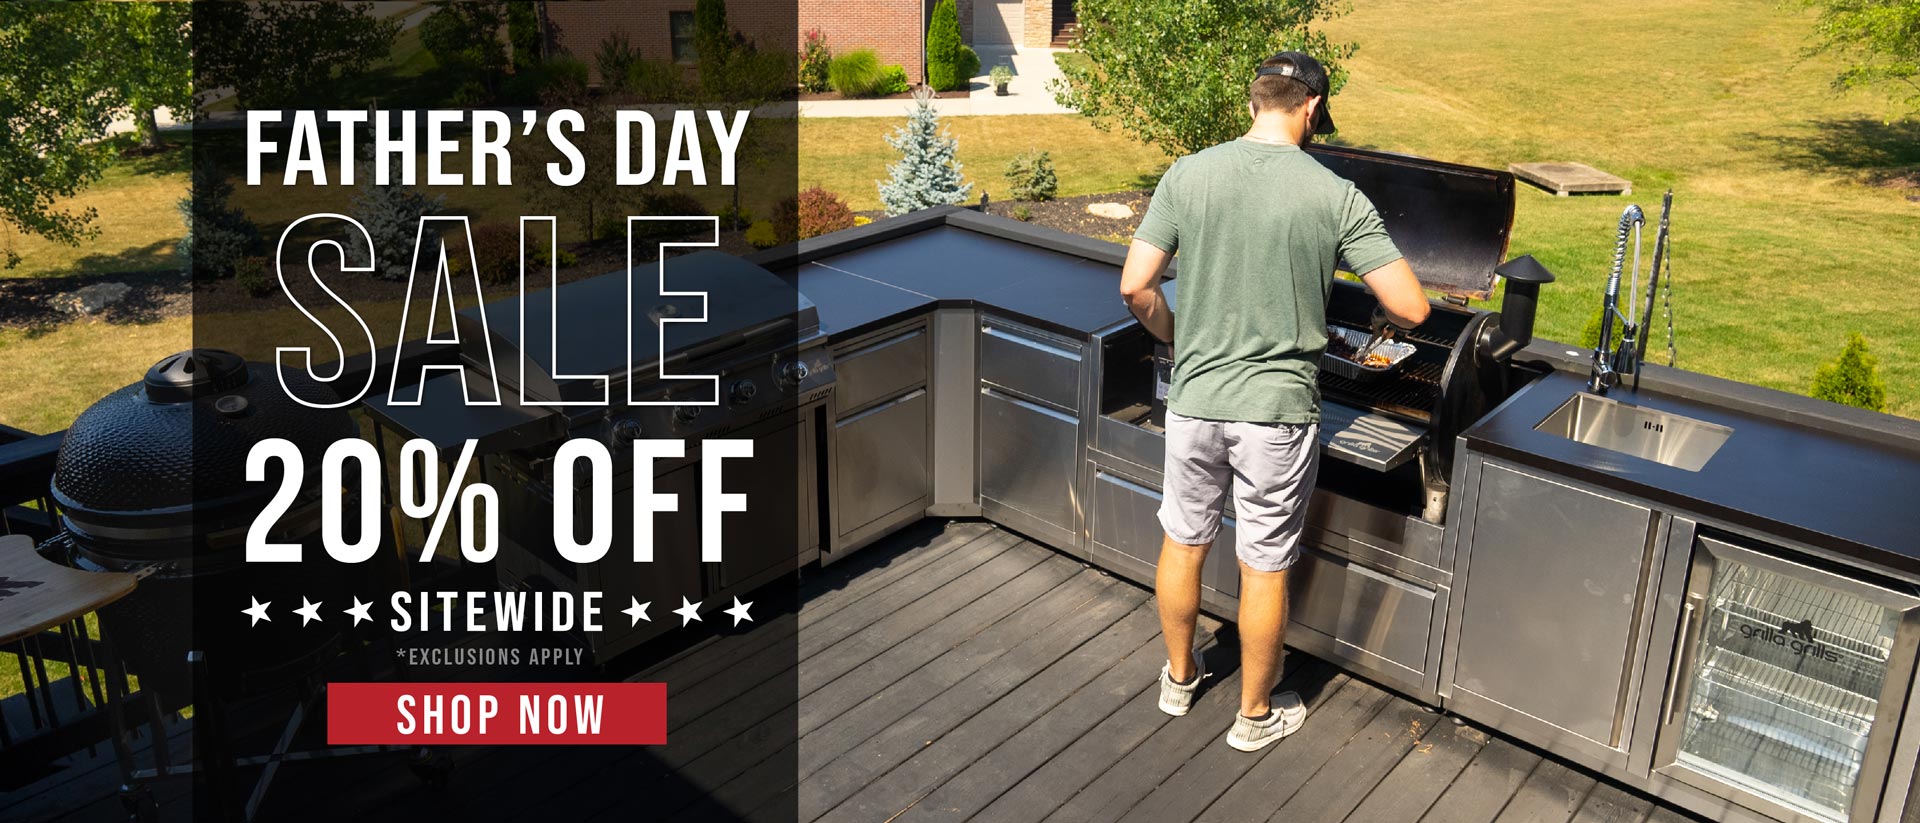 Father's Day Sale 20% off Sitewide Shop Now